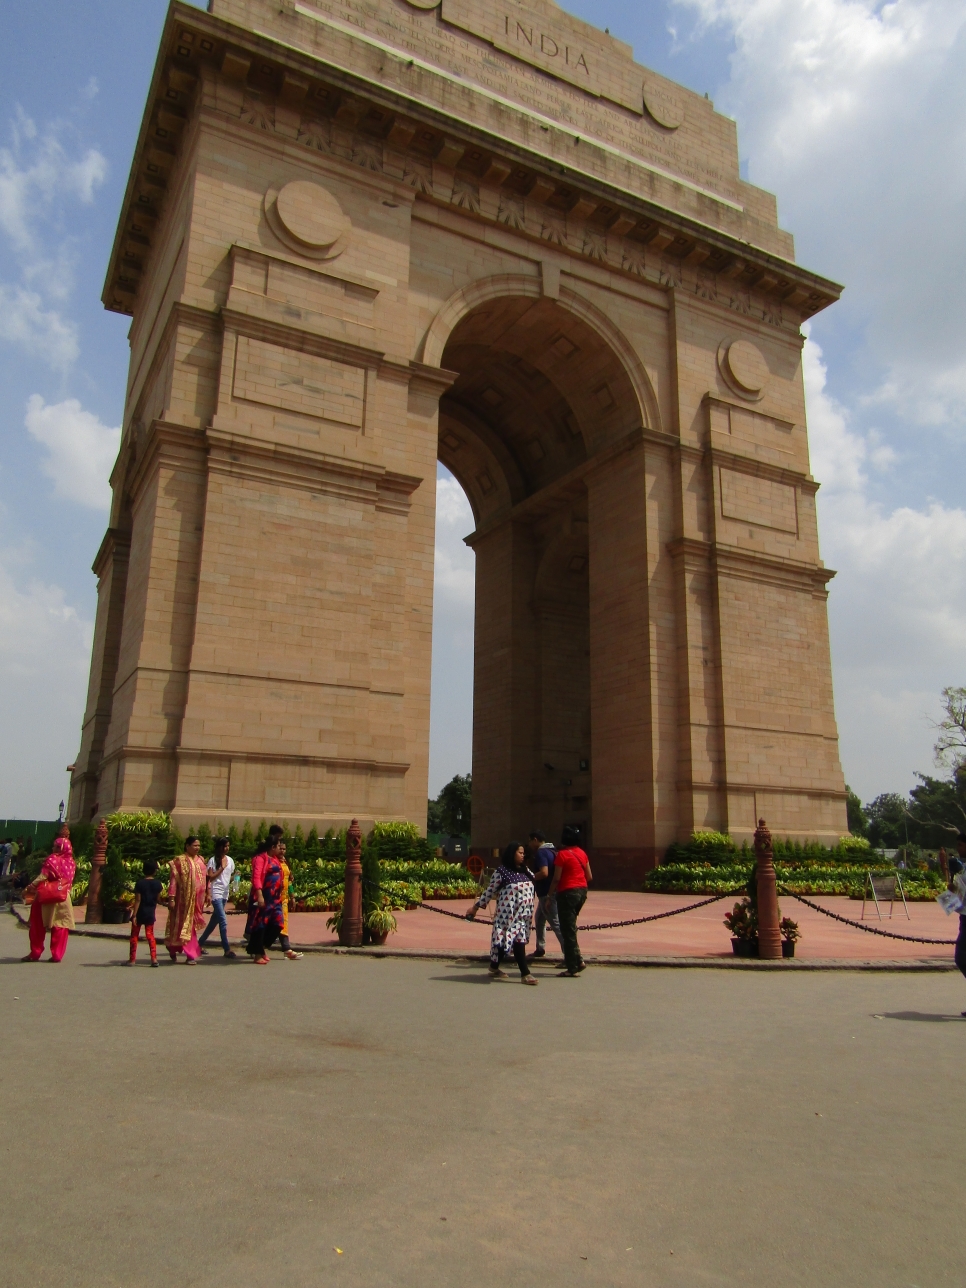 The gate of India